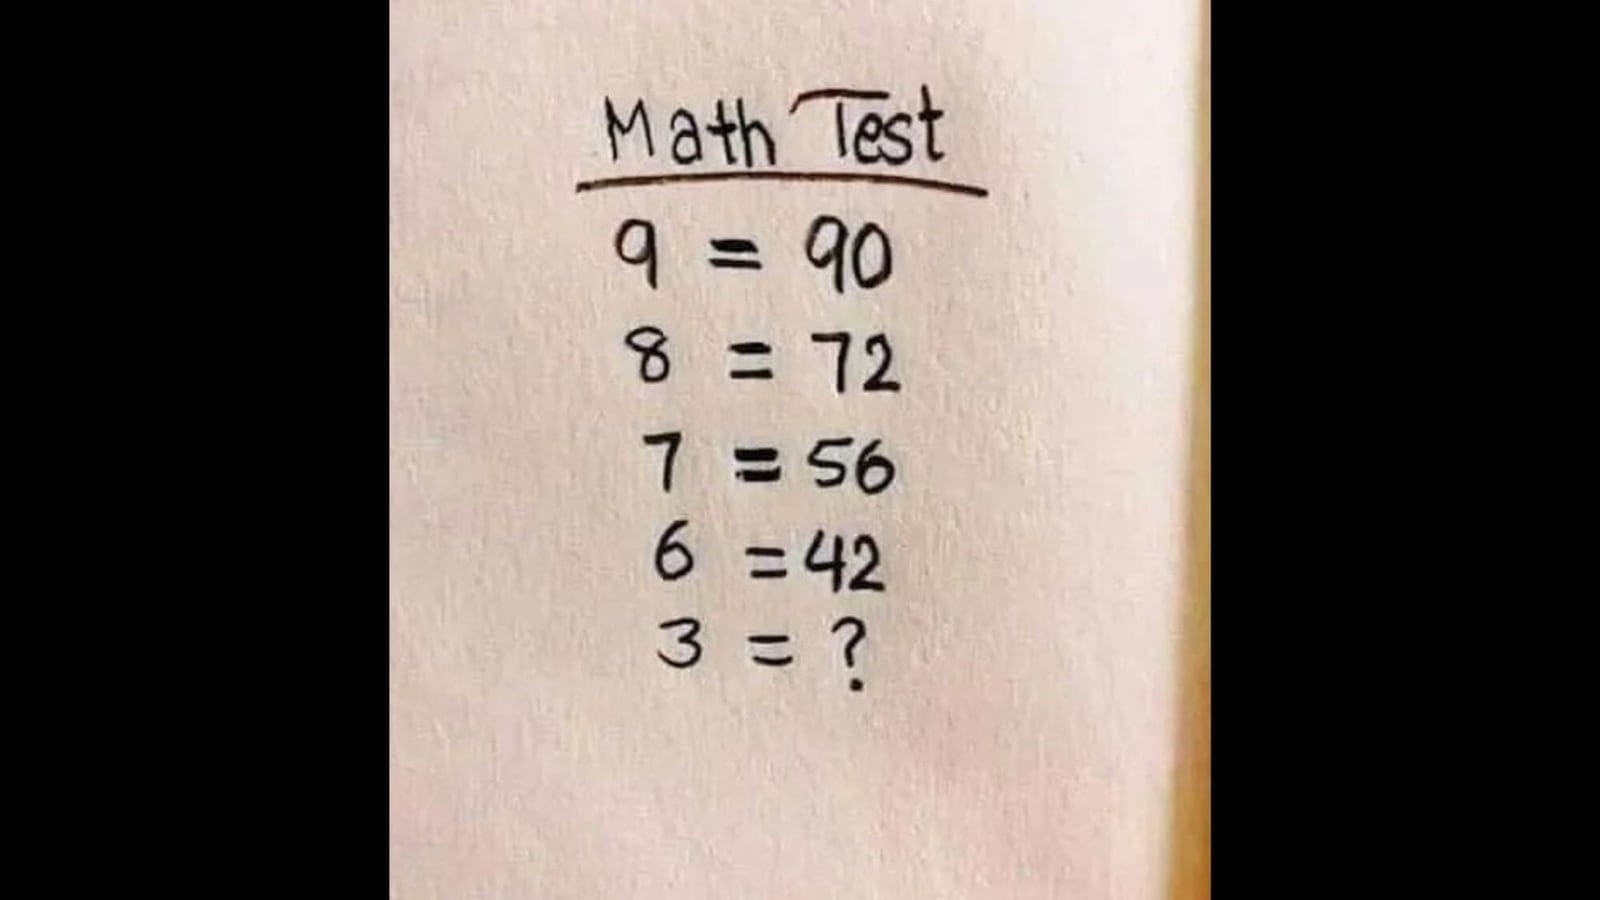 Brain Teaser: Can you find the value of number 3 in this maths test without using pen and paper?